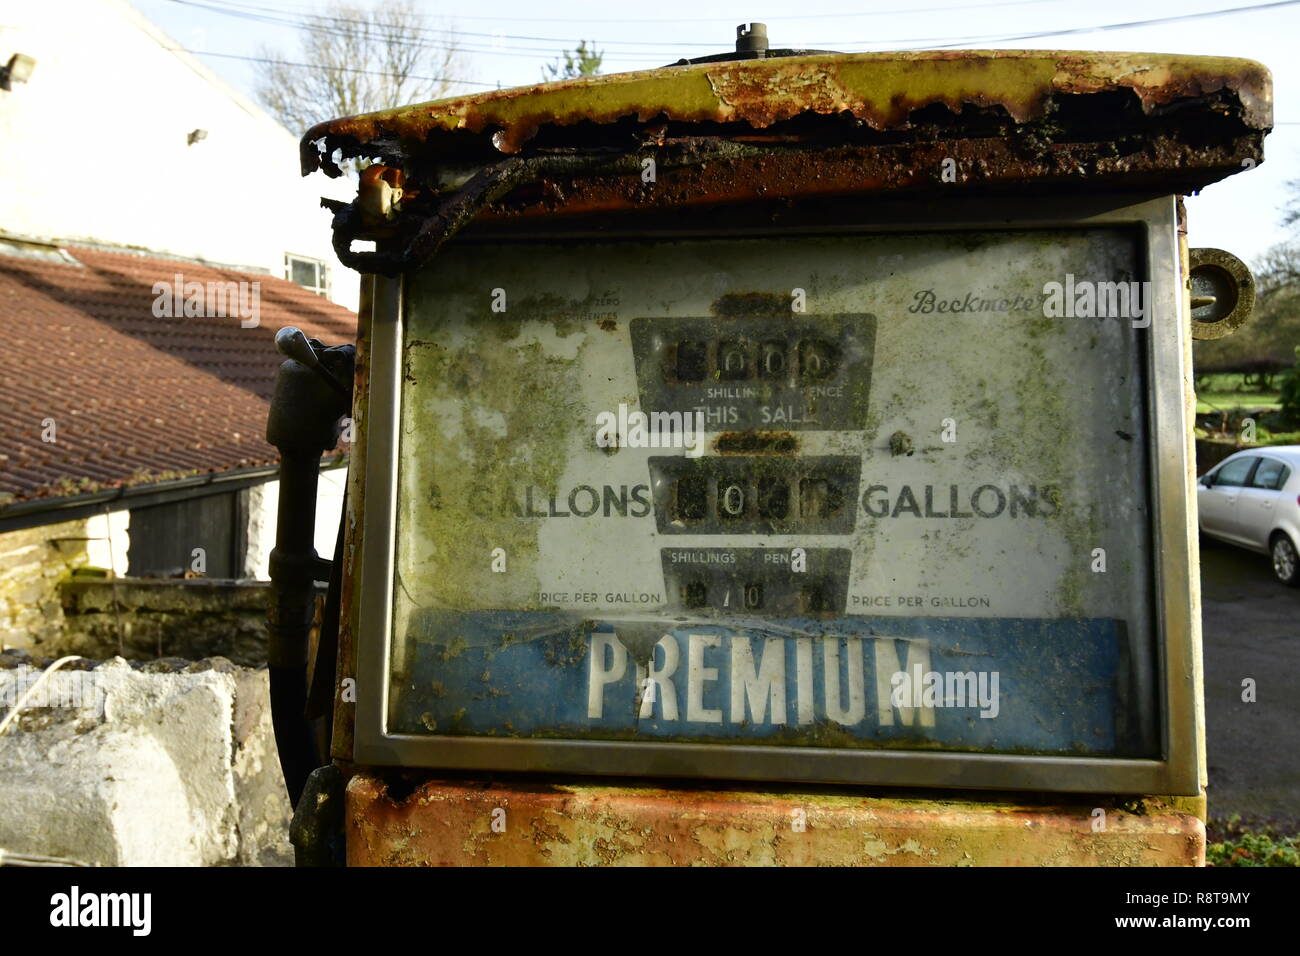 Very old petrol and derv (diesel) pumps seen on the Mendips in Somerset. Robert Timoney..Alamy/Stock/Image Stock Photo